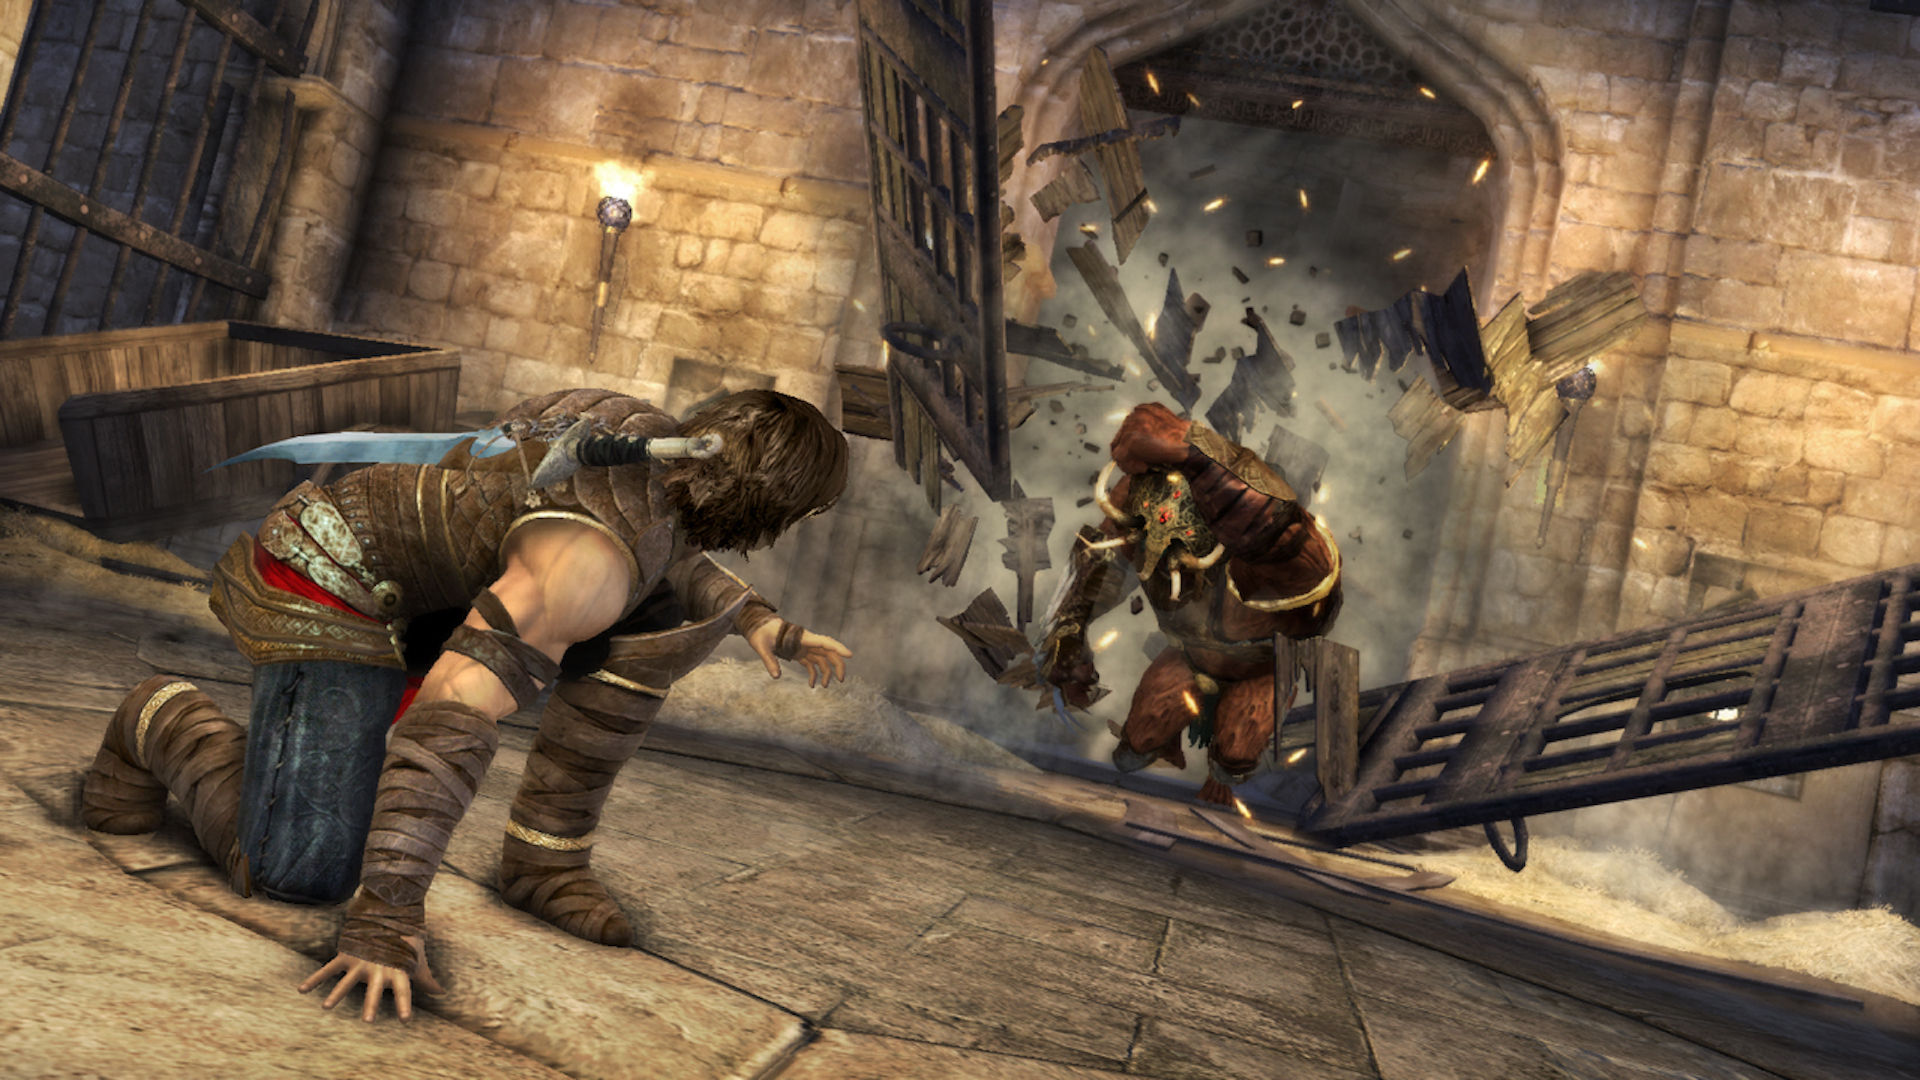 will there be a prince of persia 6